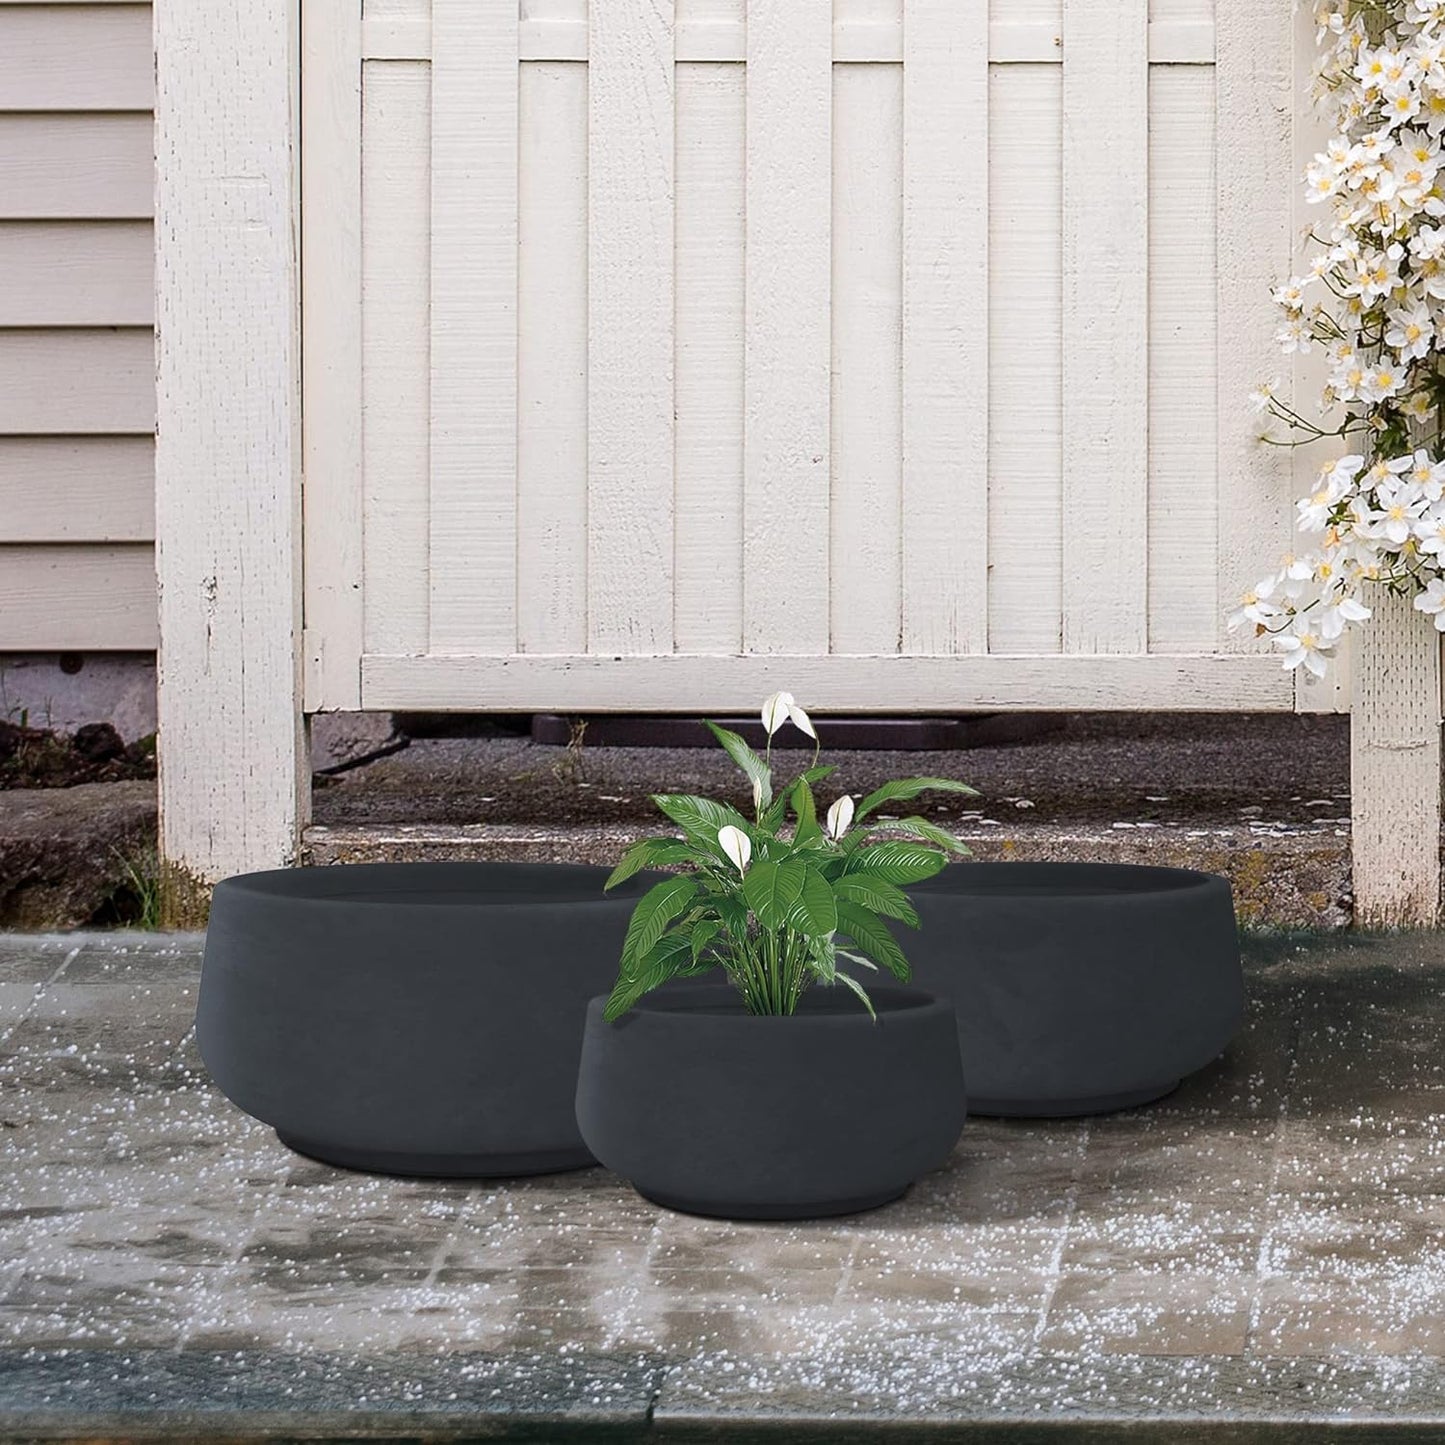 Kante 21.6",16.9",and 12.5" Dia Round Weathered Concrete Elegant Planters (Set of 3), Outdoor Indoor Garden Plant Pot with Drainage Hole and Rubber Plug for Home & Patio